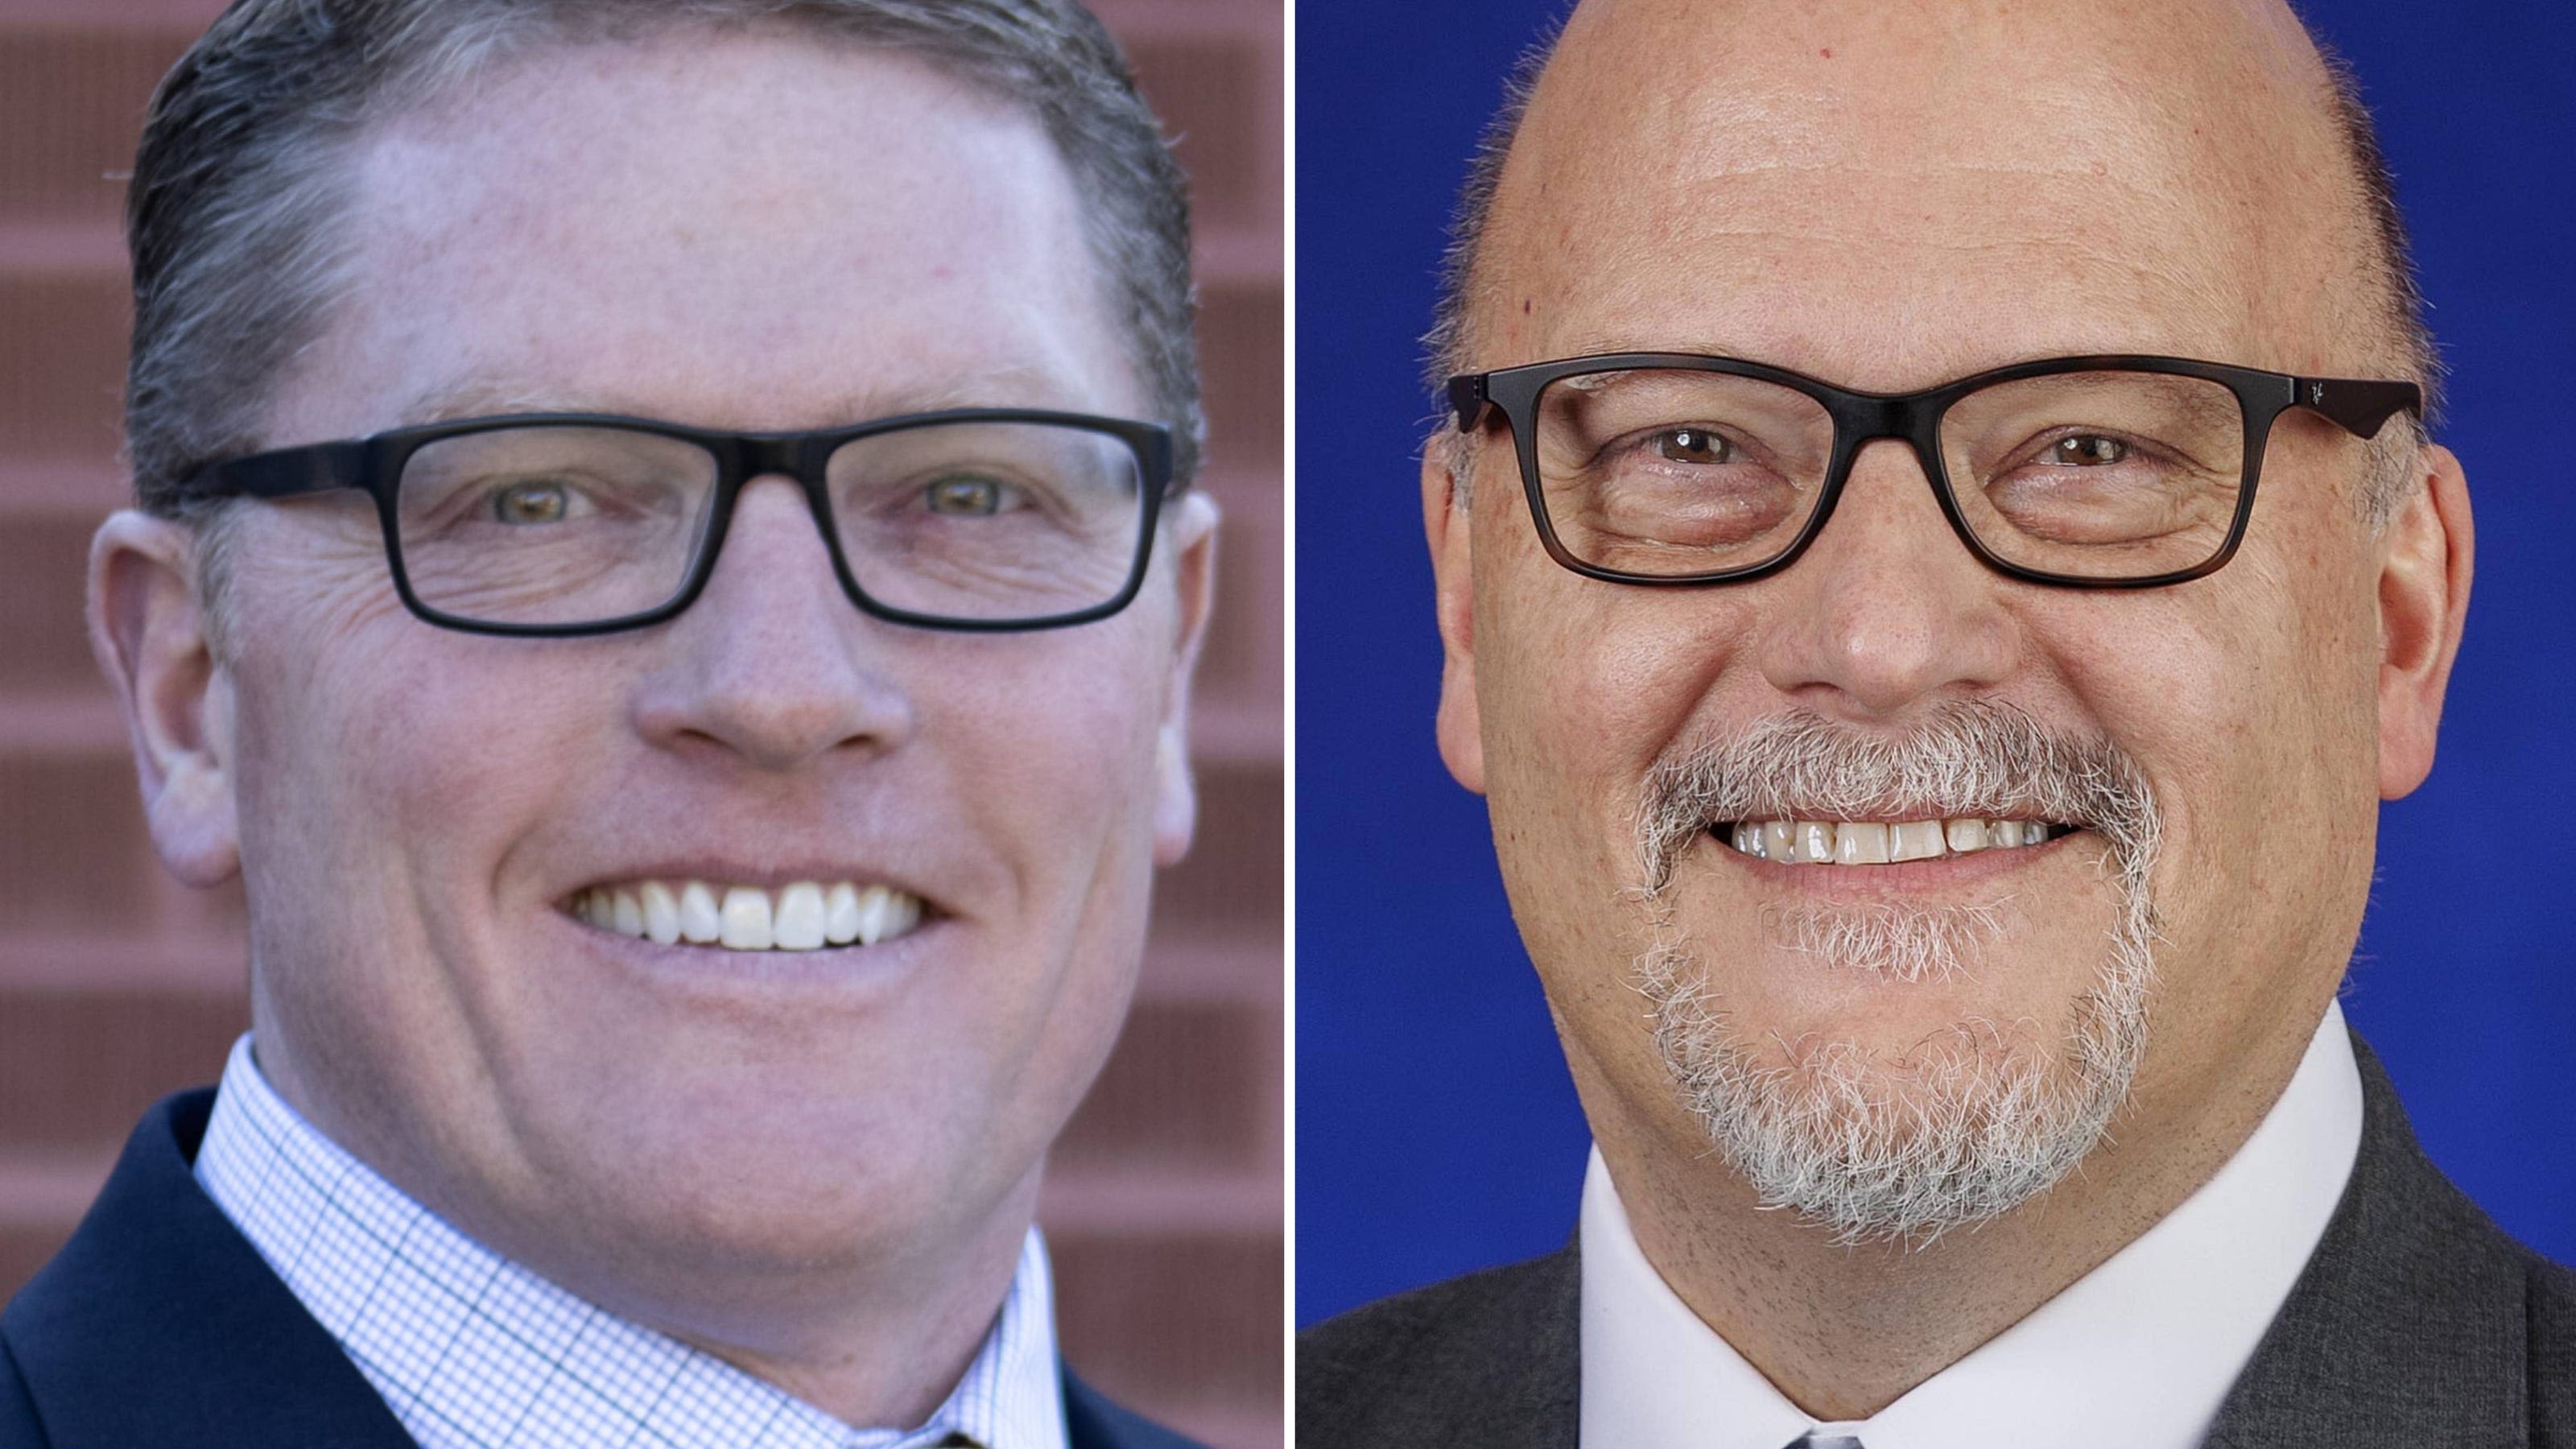 PennWest University president search: Two candidates remain to lead school. Who they are